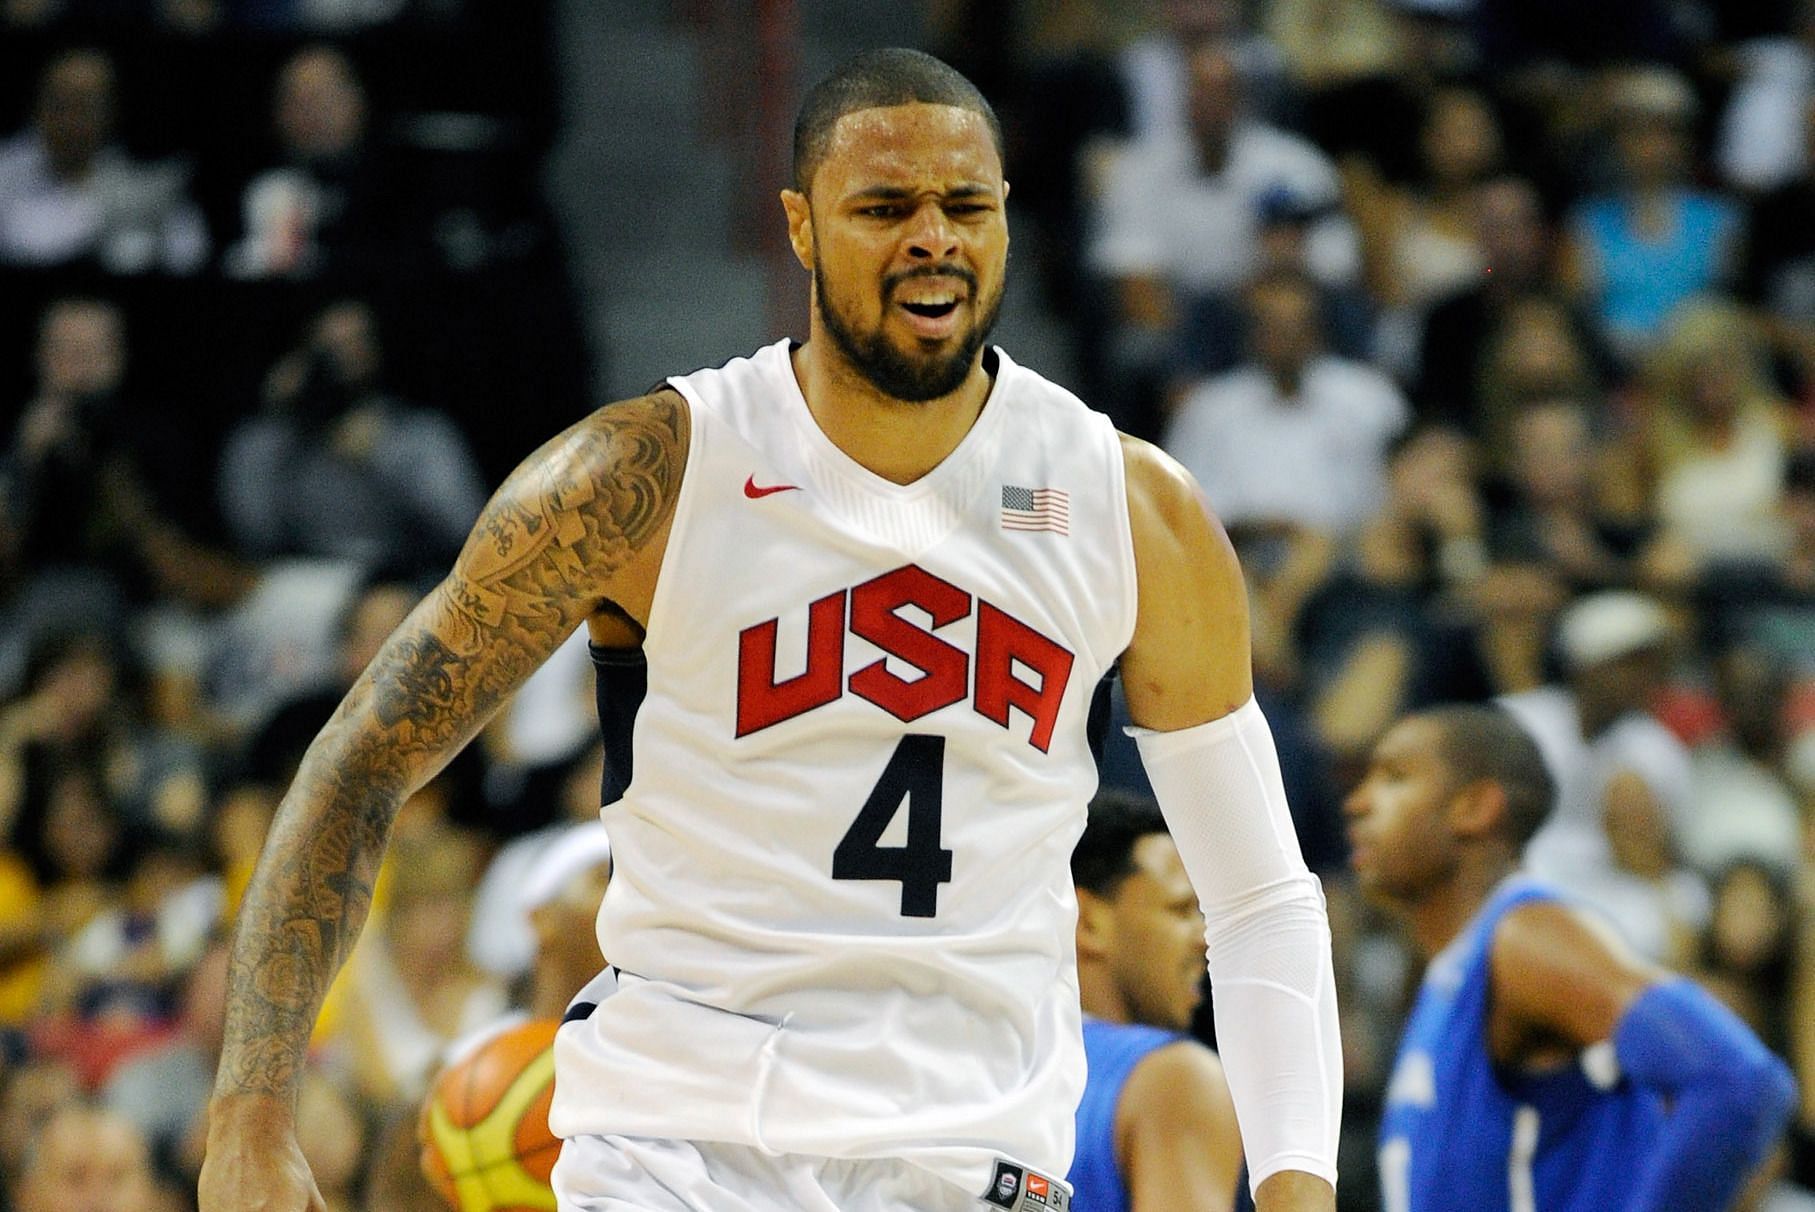 Tyson Chandler was a big member of the 2012 team.